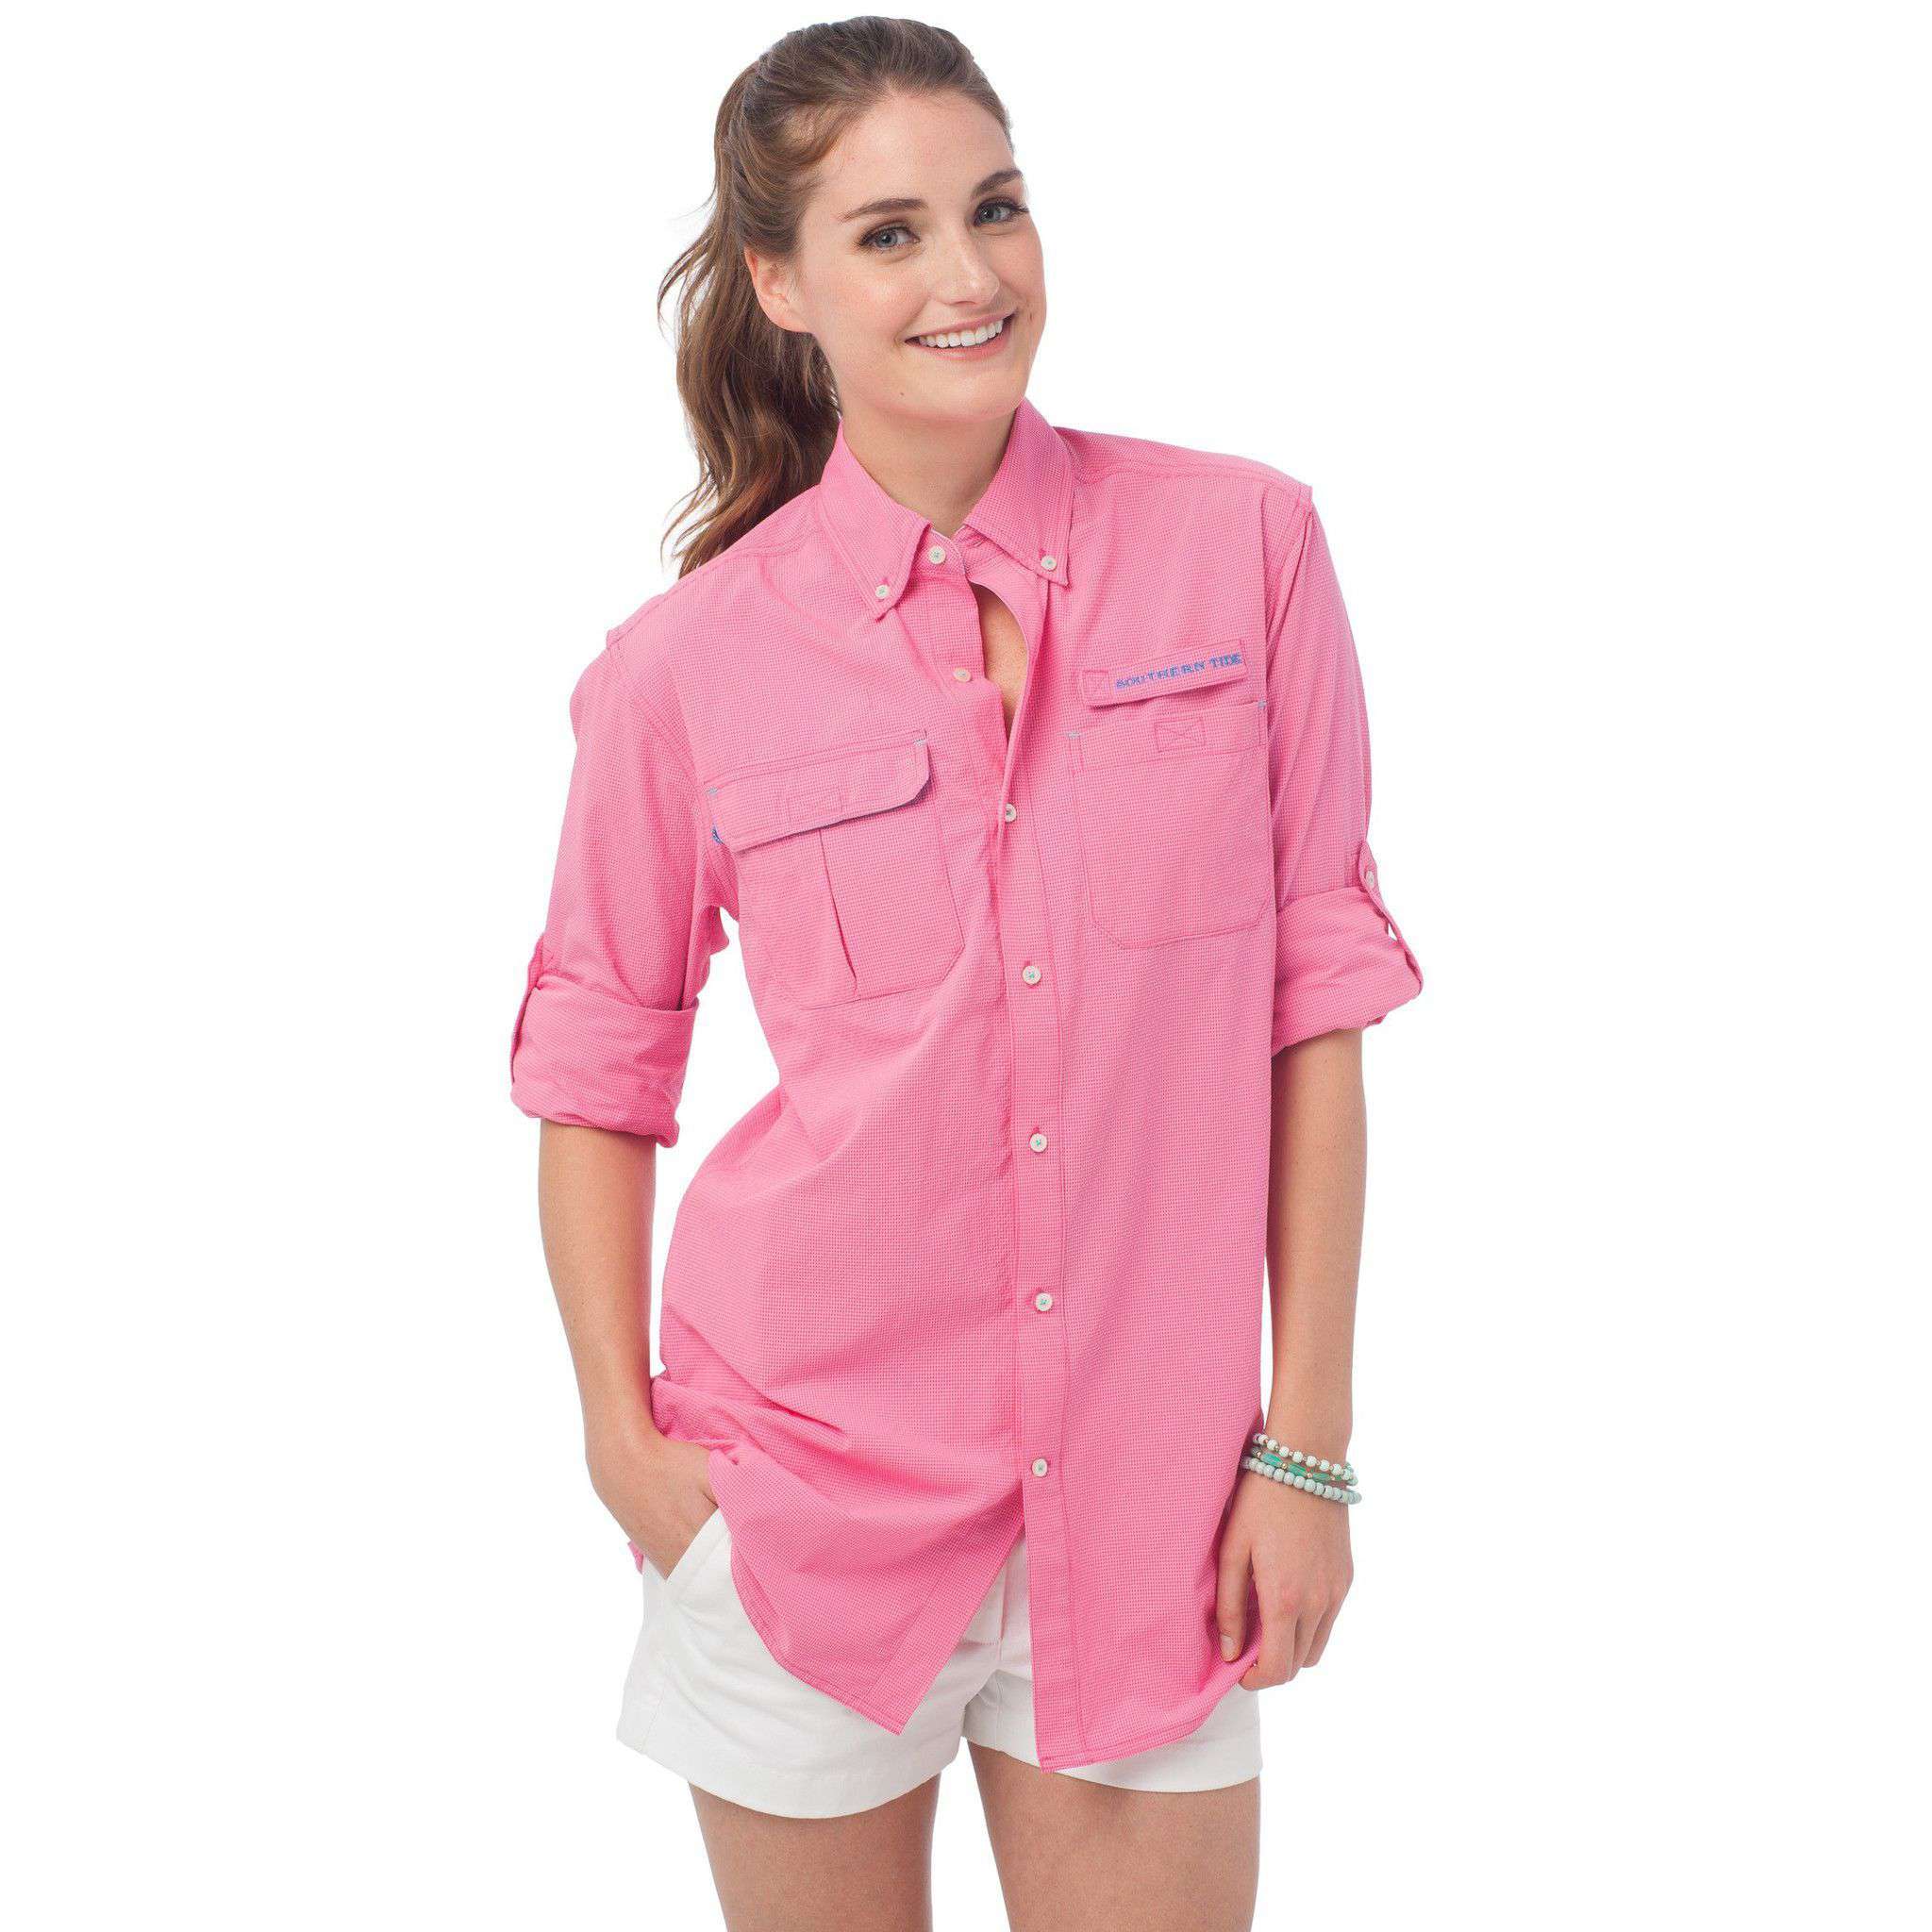 Women's Sullivan Fishing Shirt in Berry Check by Southern Tide